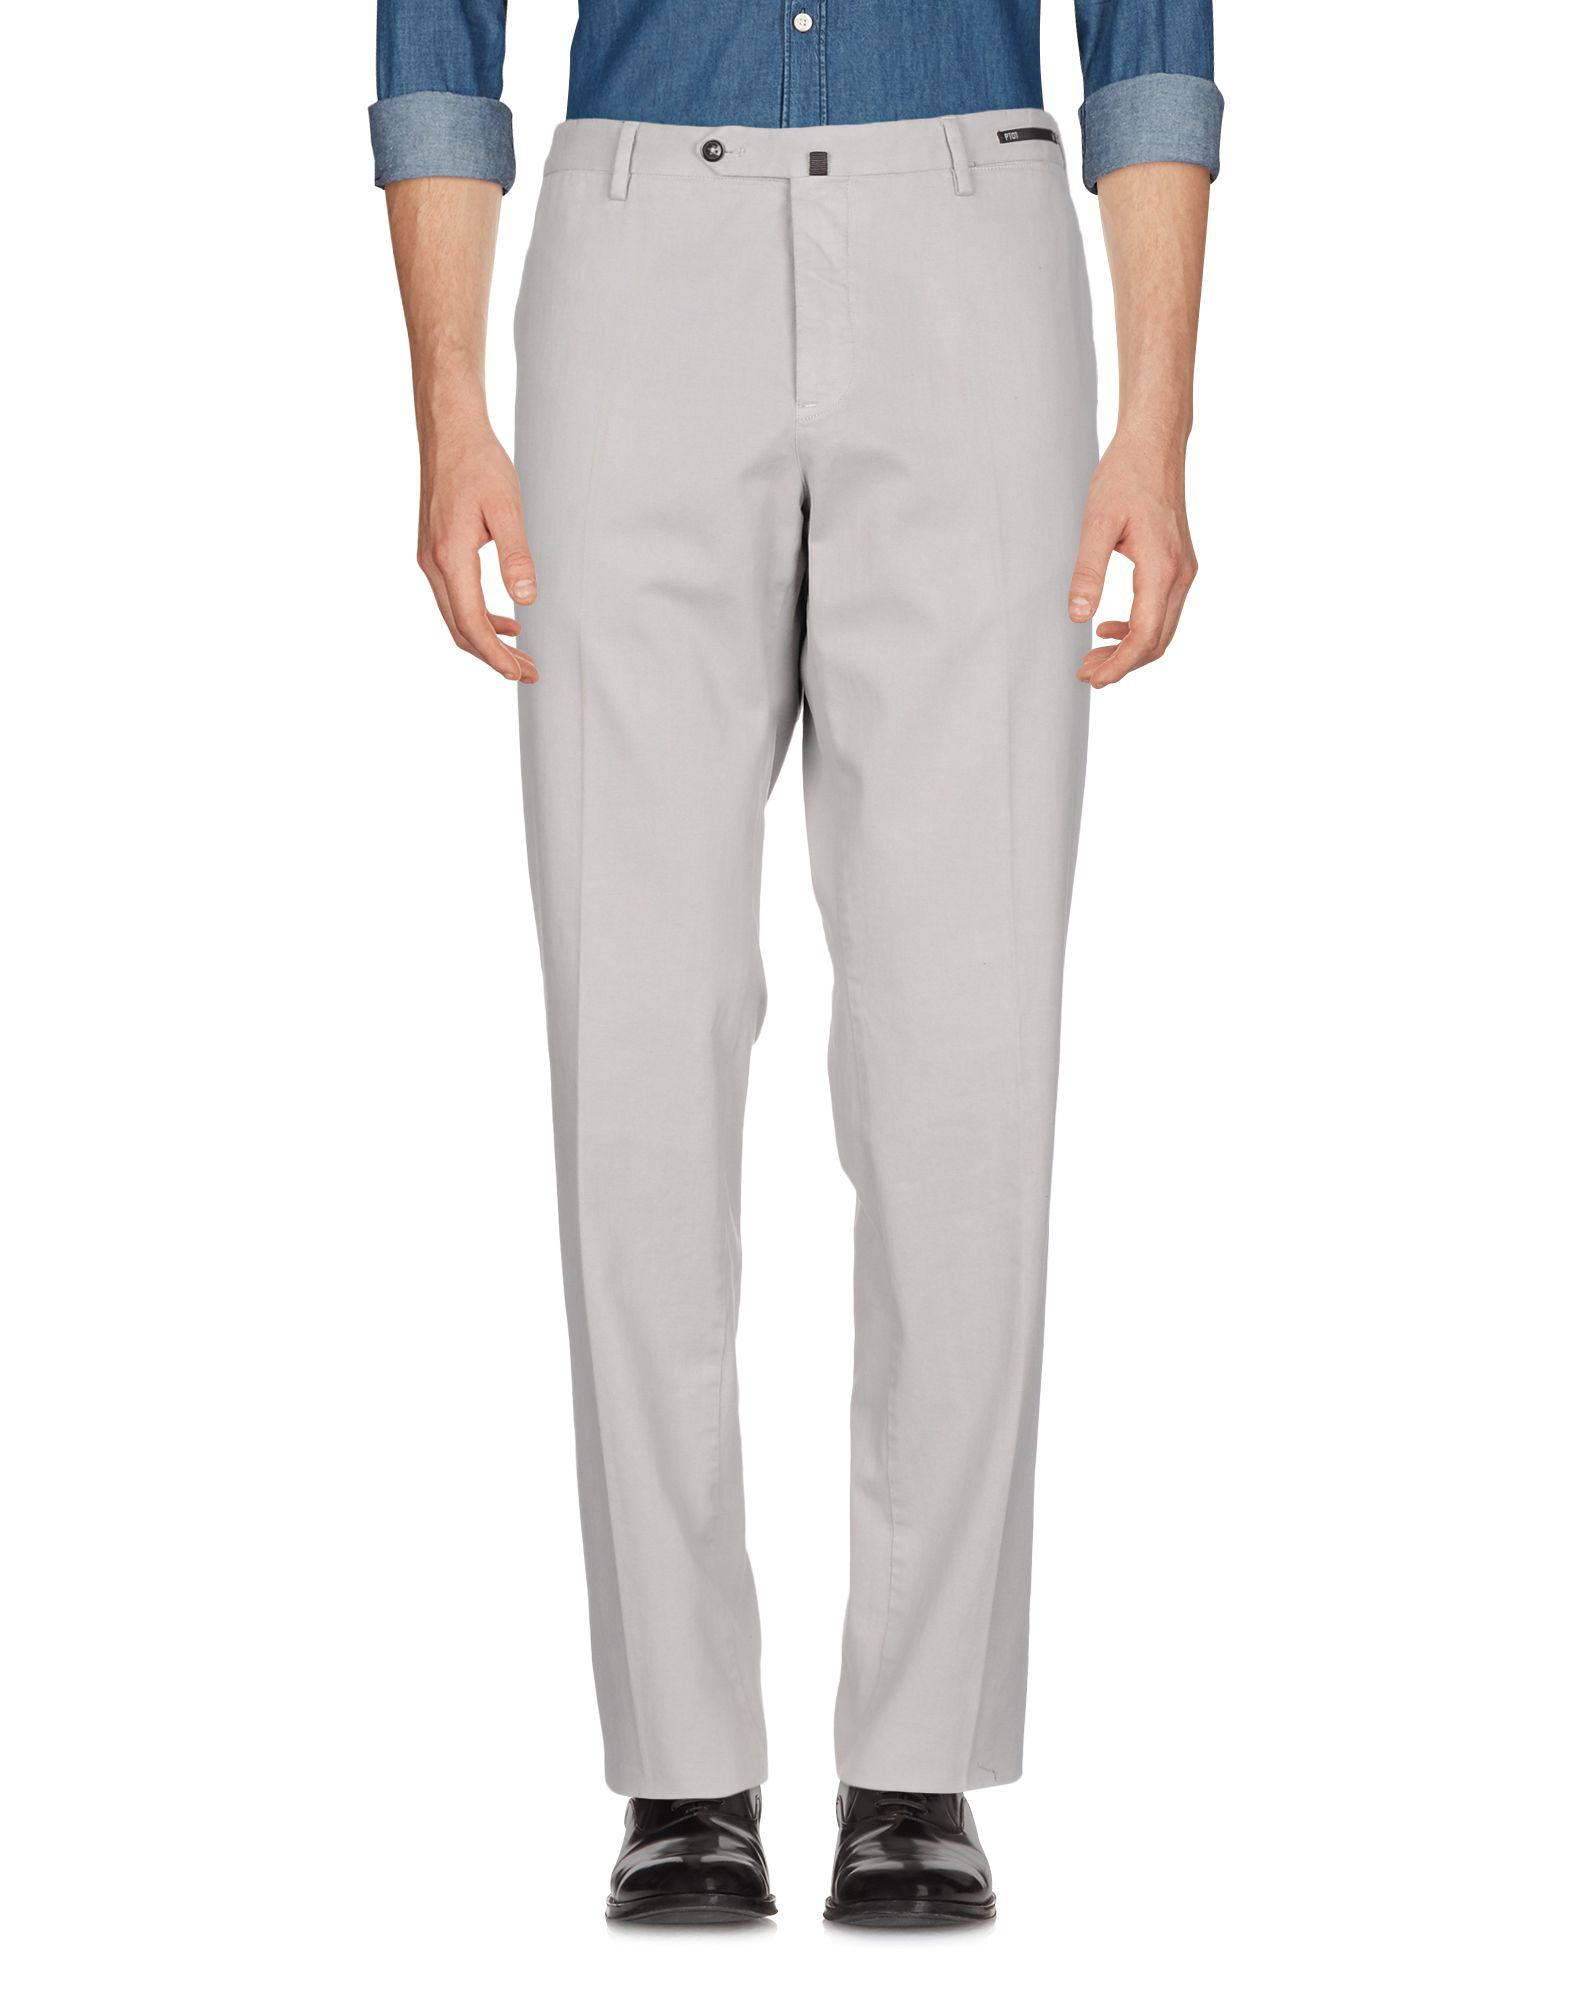 PT01 Casual Trouser in Gray for Men - Lyst